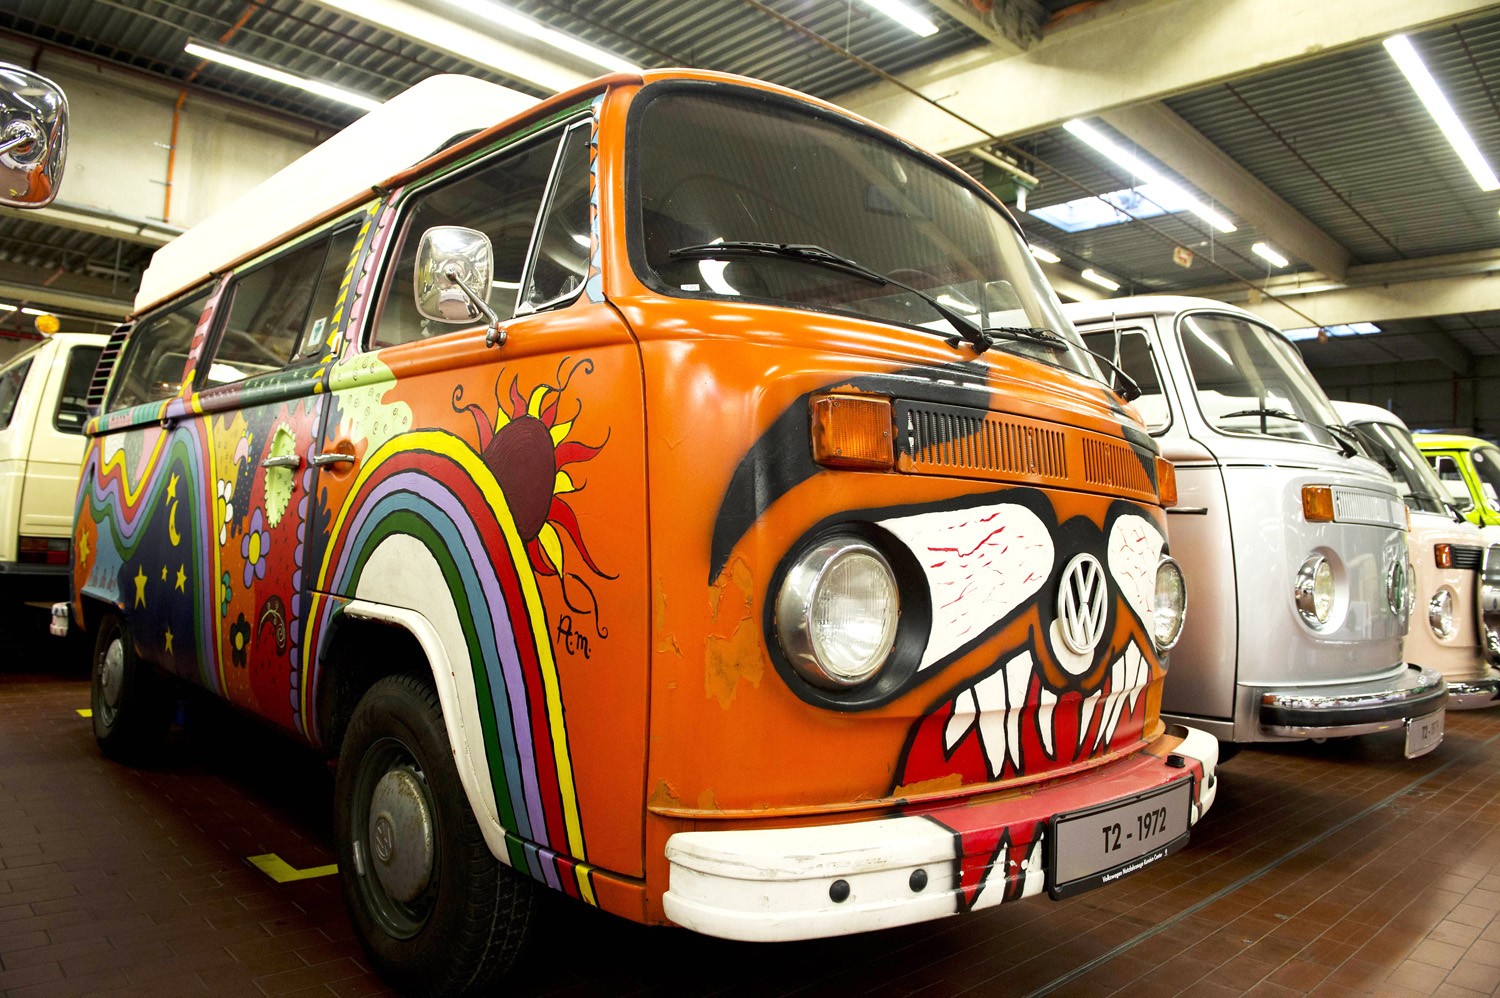 Camper van, symbol of hippy movement, will ride more | South China Morning